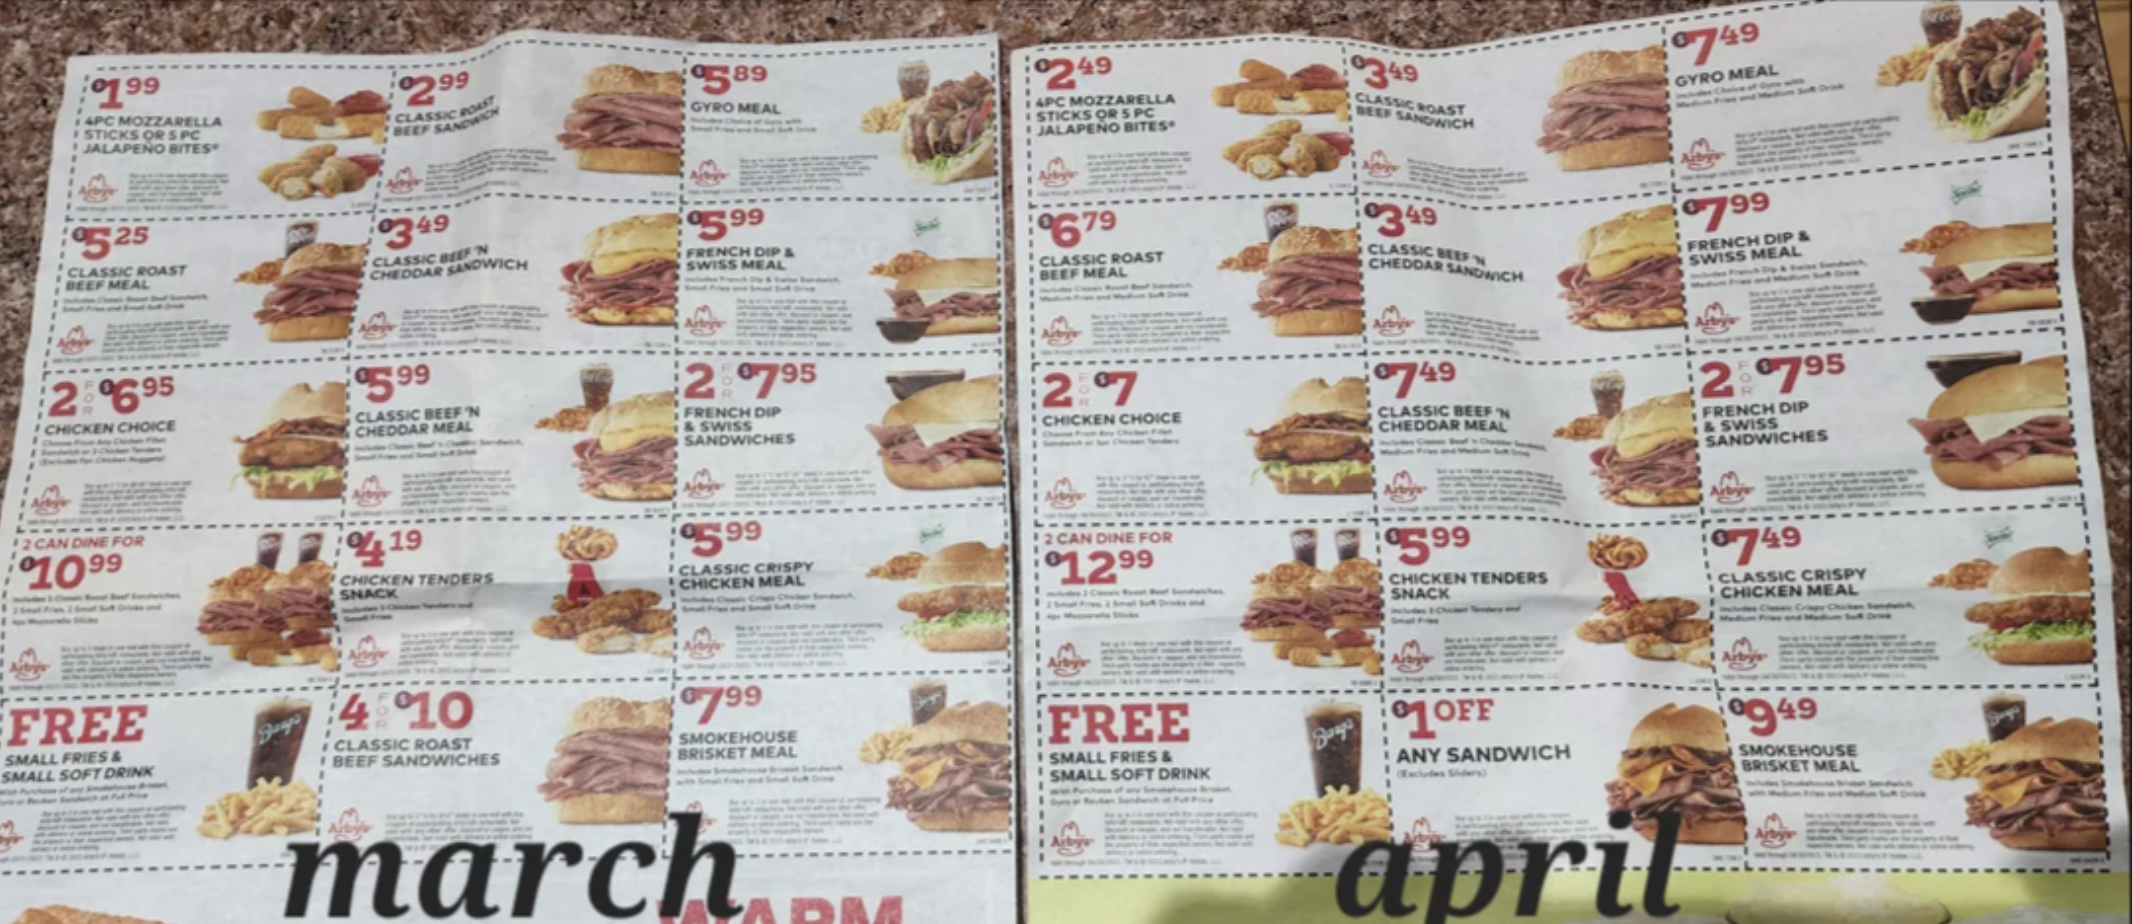 Two fast food restaurant flyers side by side comparing meal deals for March and April with the April prices on many items $2 higher